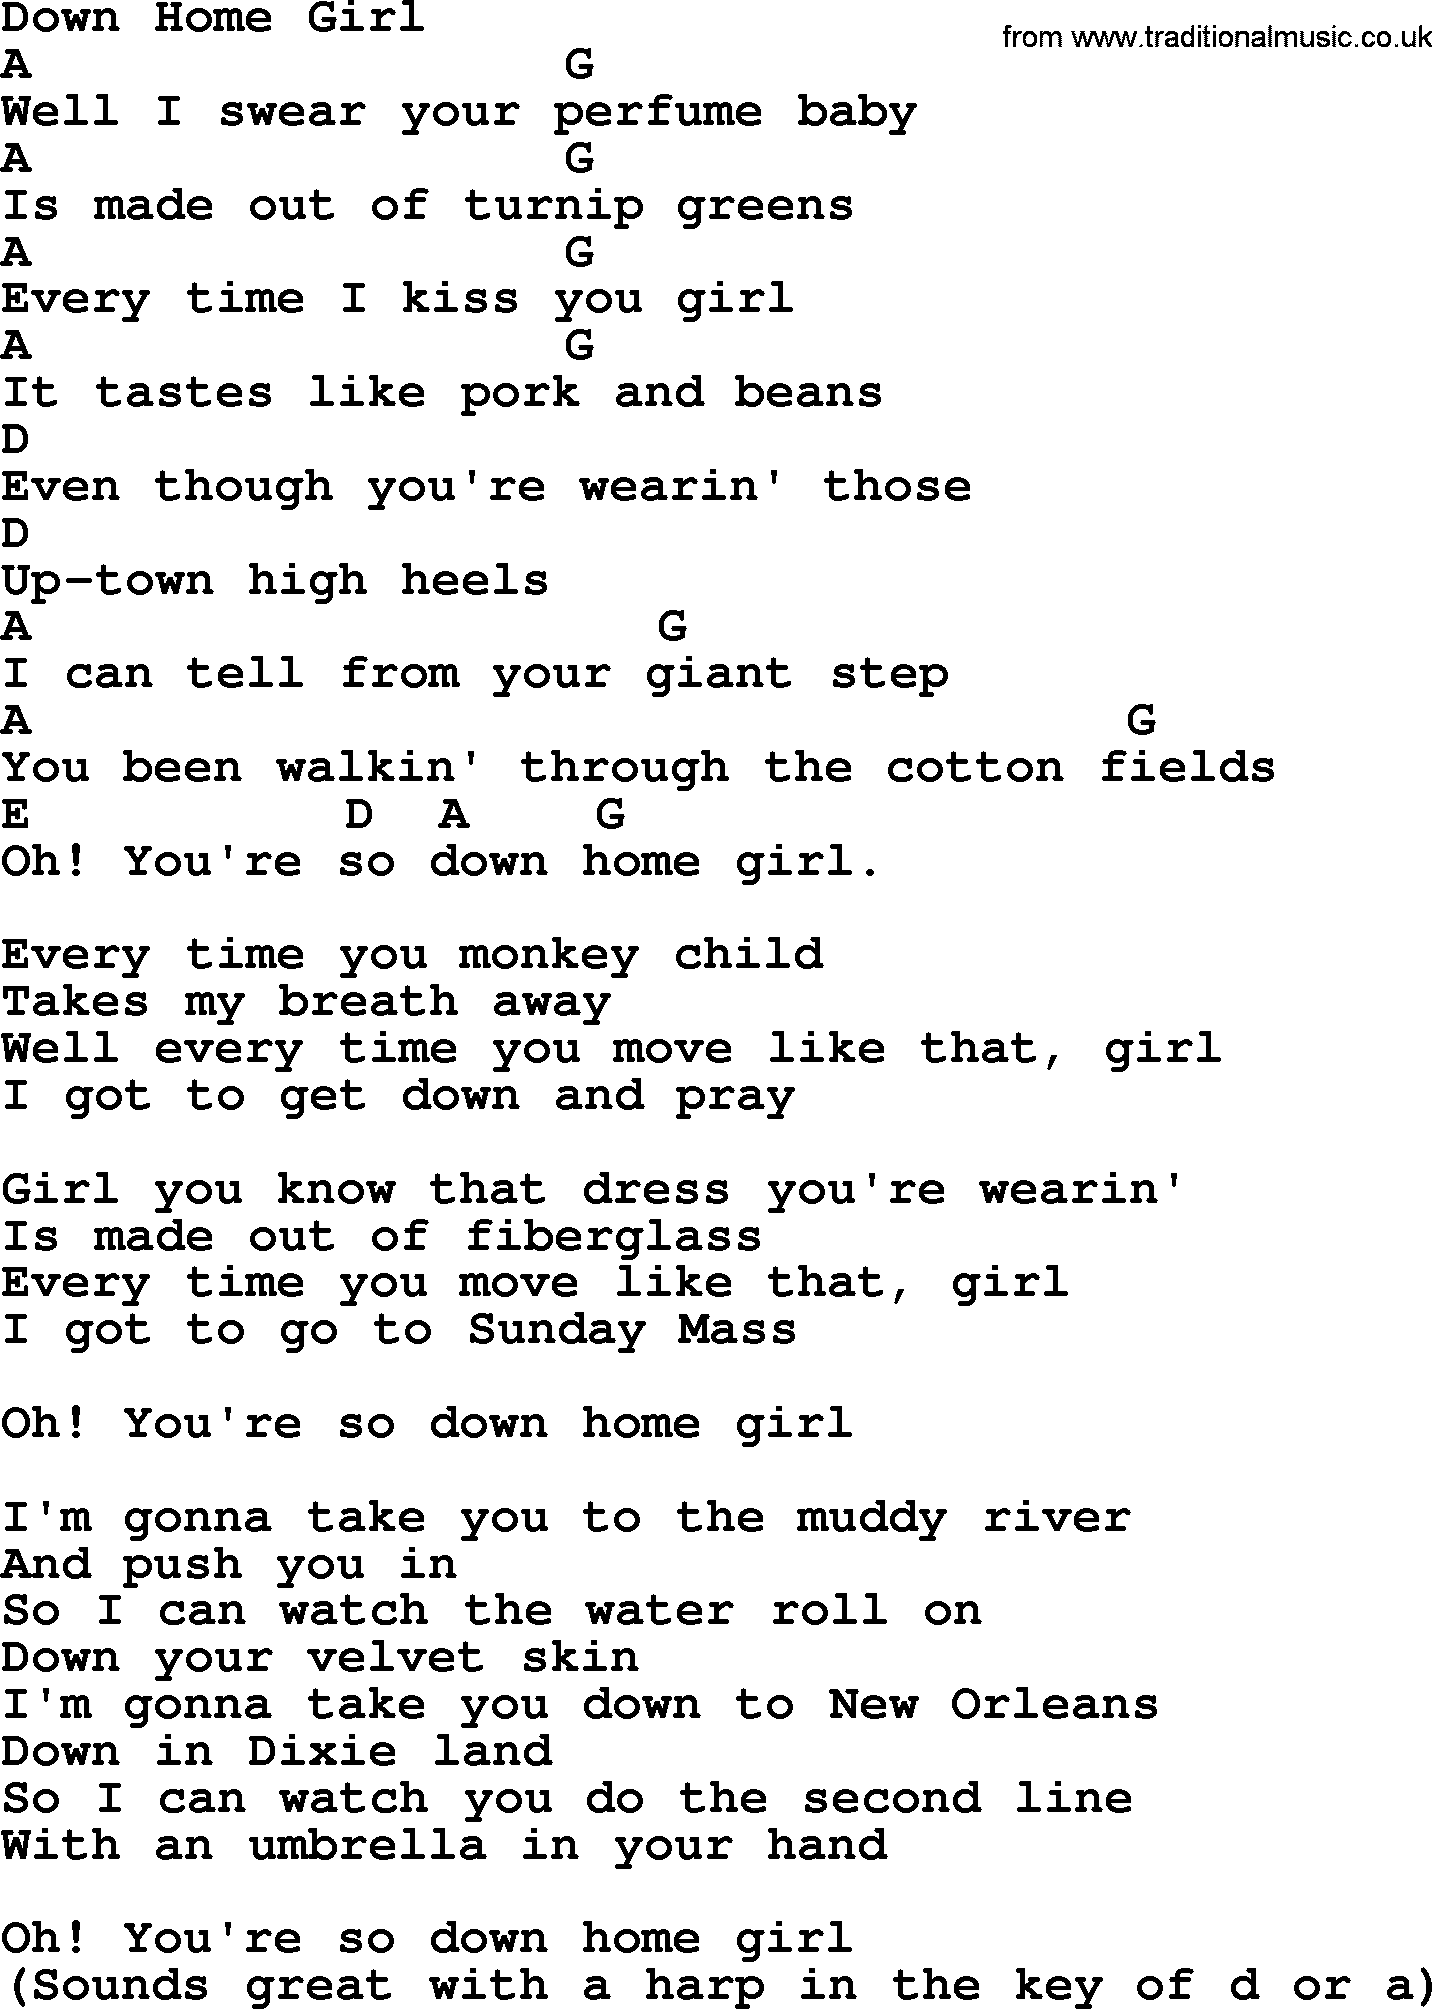 Bluegrass song: Down Home Girl, lyrics and chords